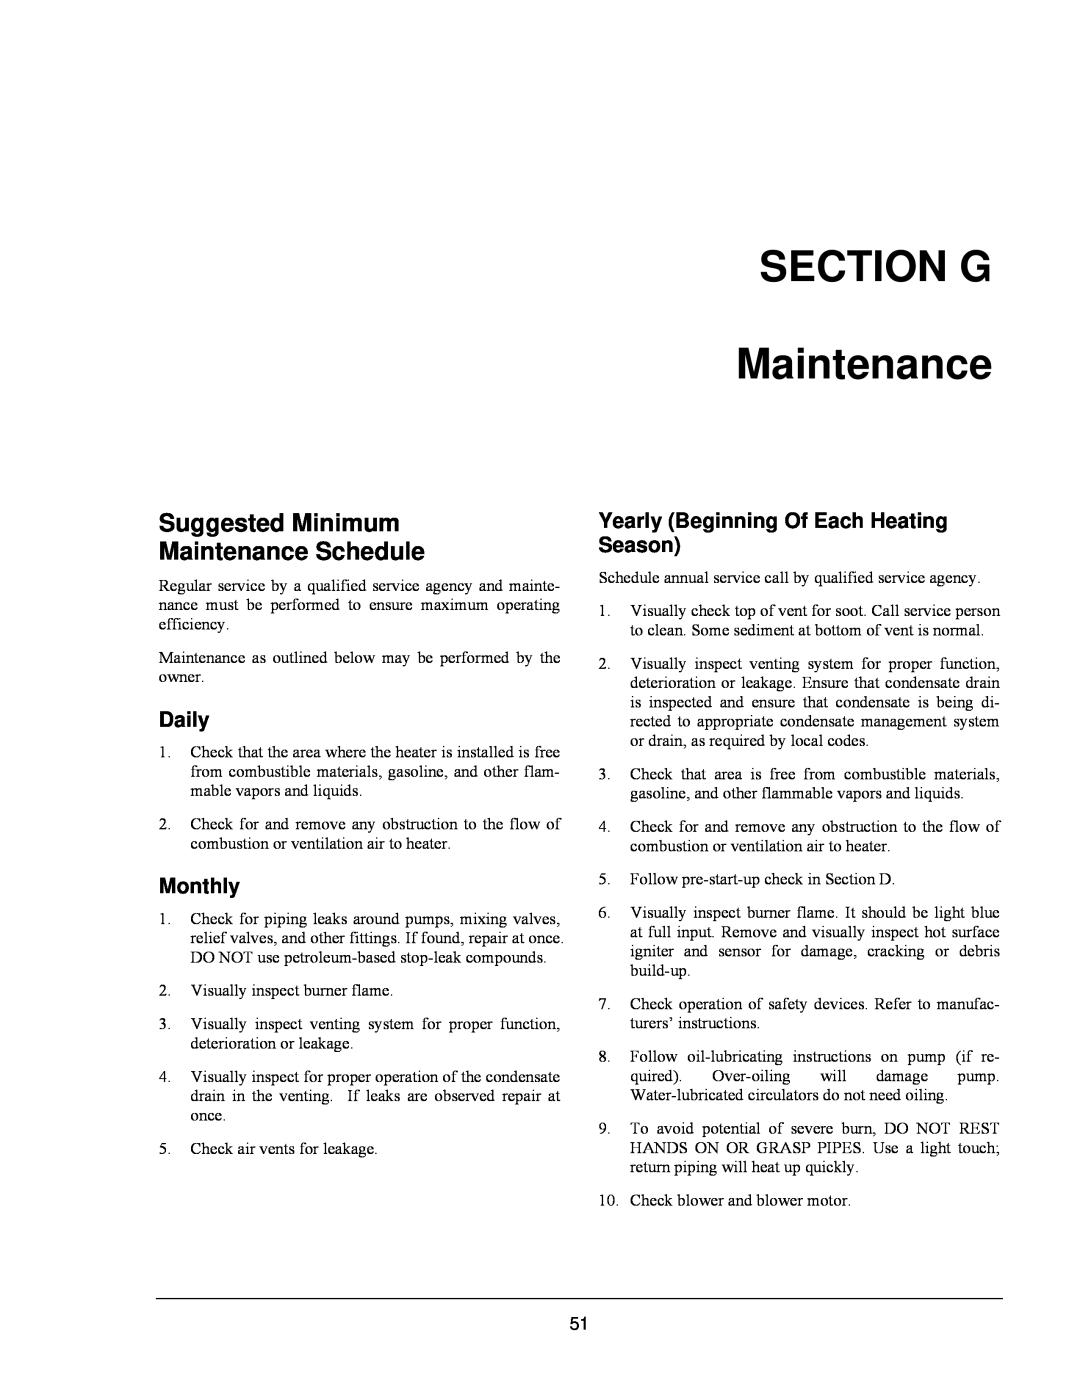 Raypak 503-2003 manual SECTION G Maintenance, Suggested Minimum Maintenance Schedule, Daily, Monthly 